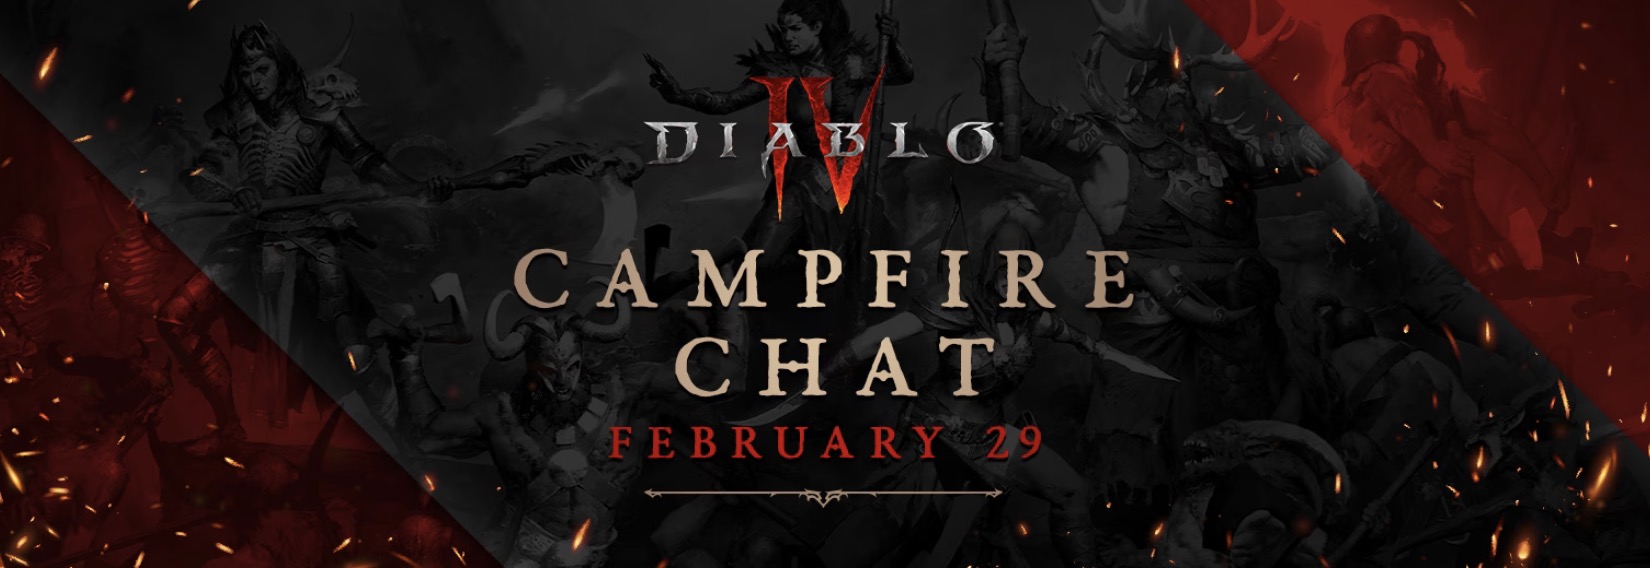 Next Diablo 4 Campfire Chat Scheduled for February 29th